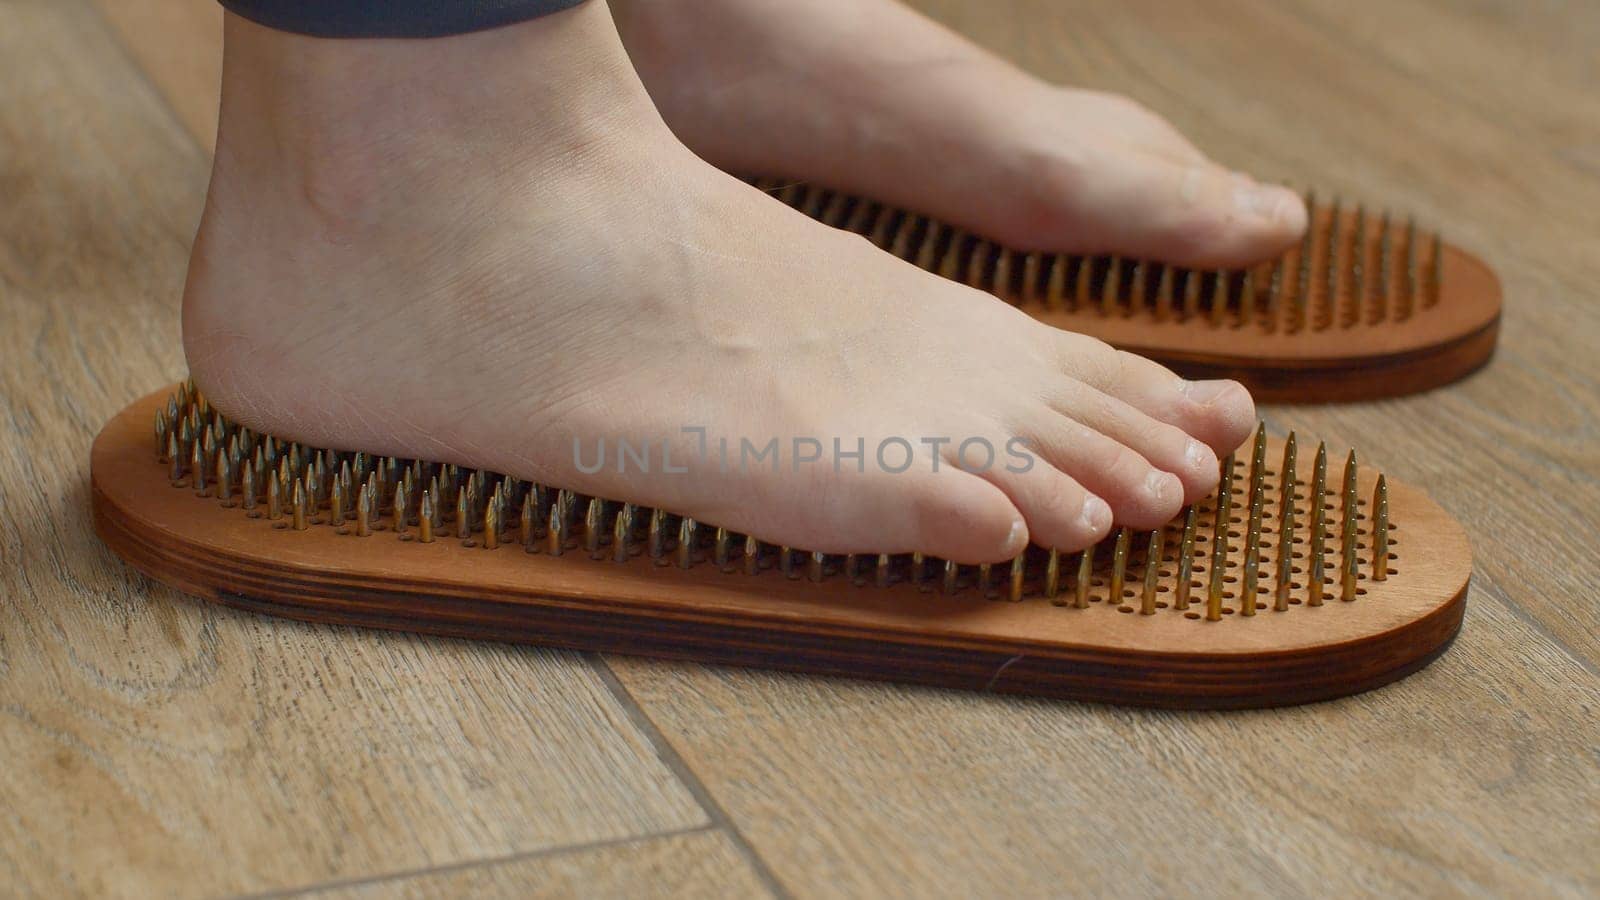 Female feet standing on boards with nails, close up. Media. Barefoot female standing on yoga nails board